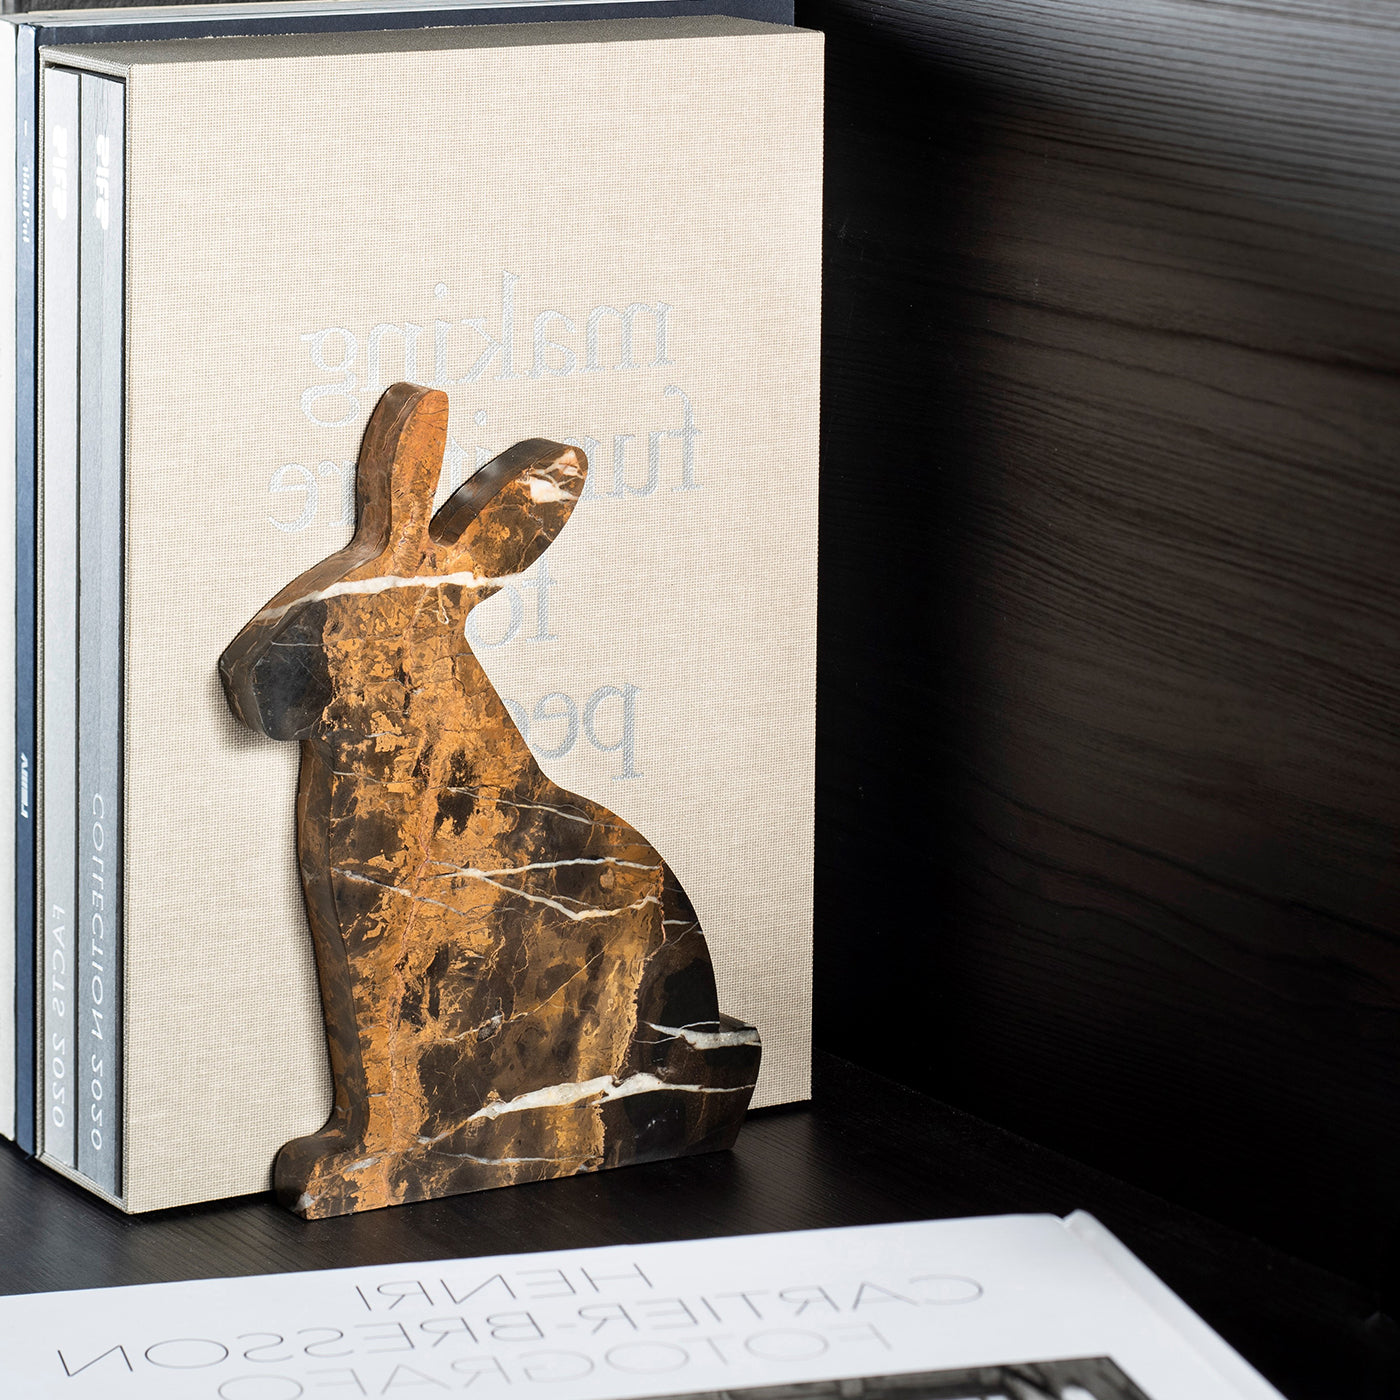 Bunny Black and Gold Right Bookend by Alessandra Grasso - Alternative view 3